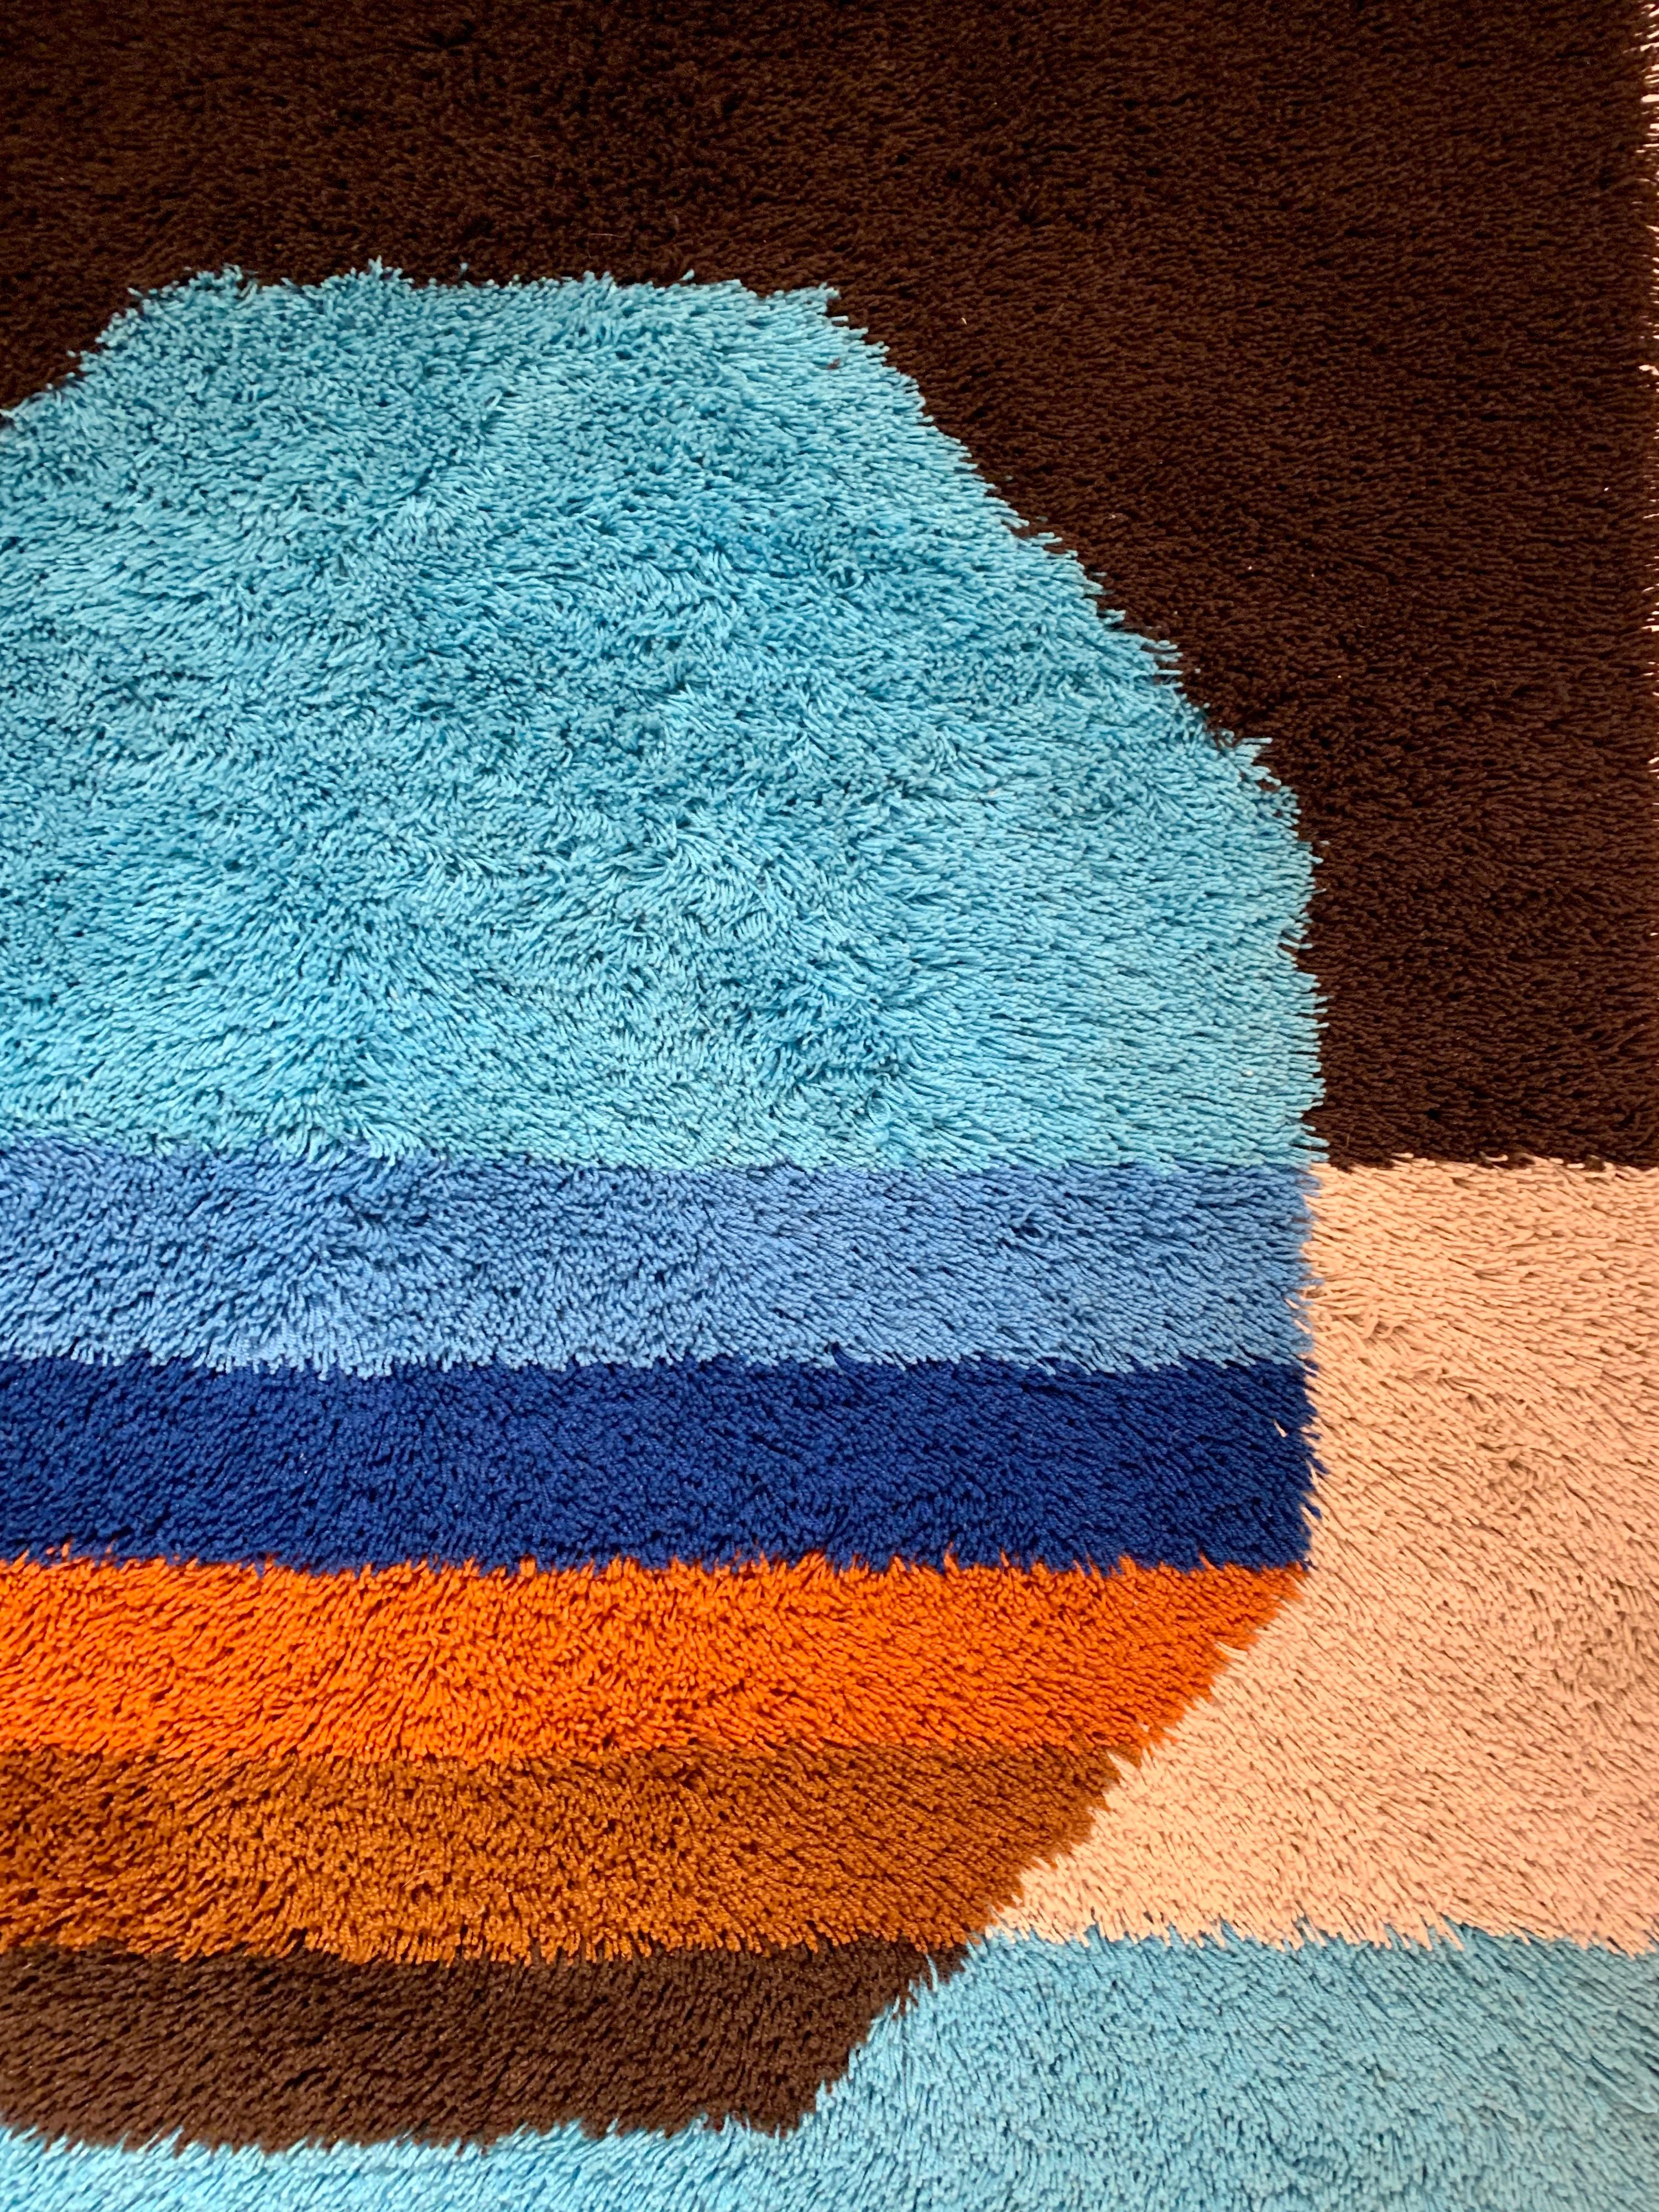 Desso is a Dutch rug company that created decorative carpets in the 1970s. This particular model is contemporary with the pop style of Verner Panton with his bright saturated colours.